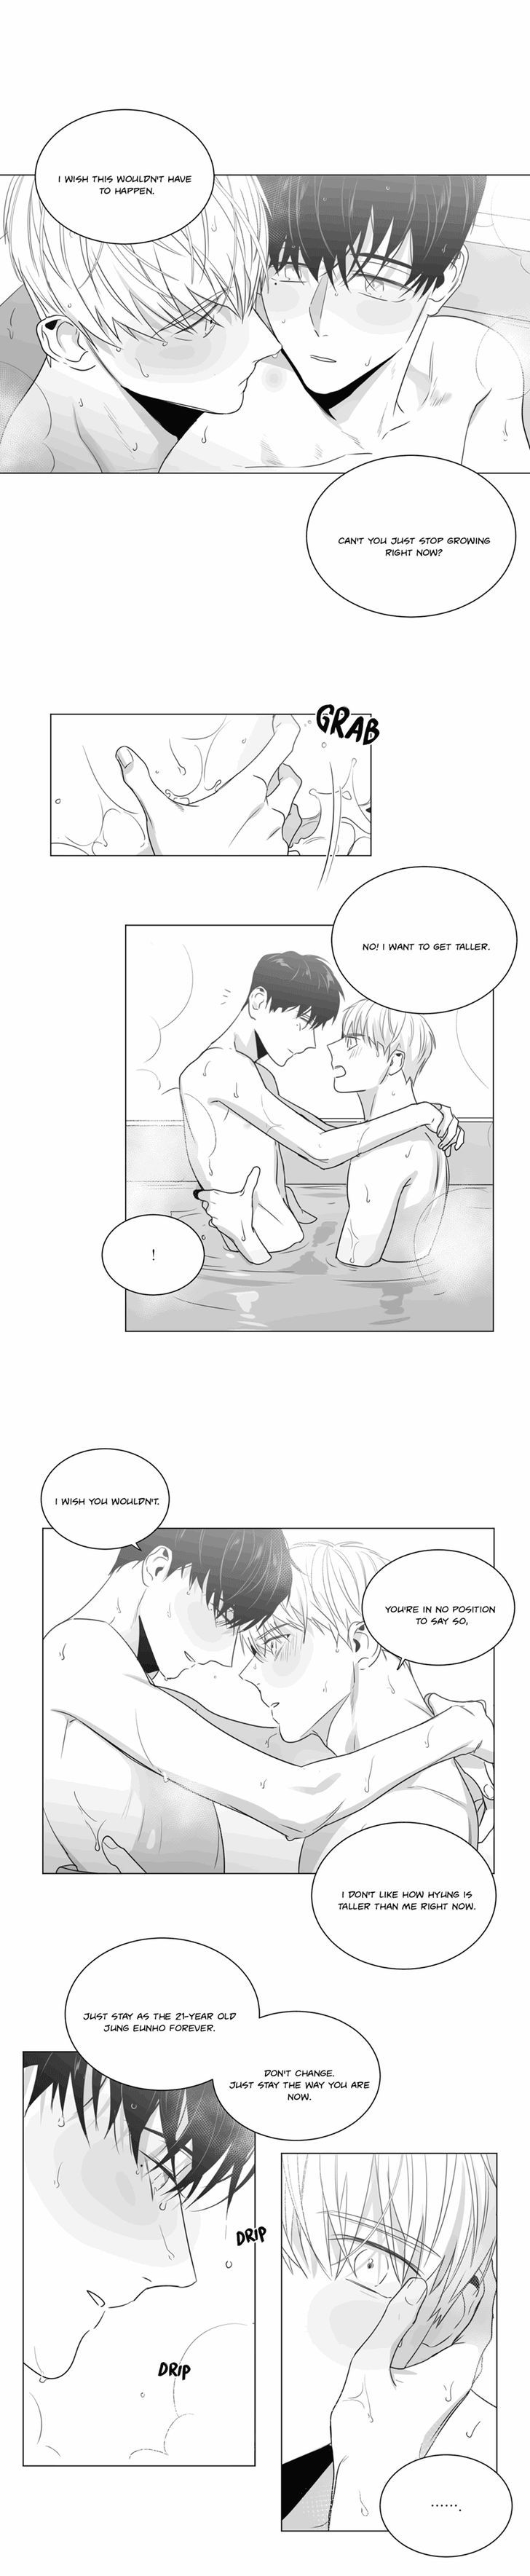 Lover Boy (Lezhin) Chapter 035 page 4